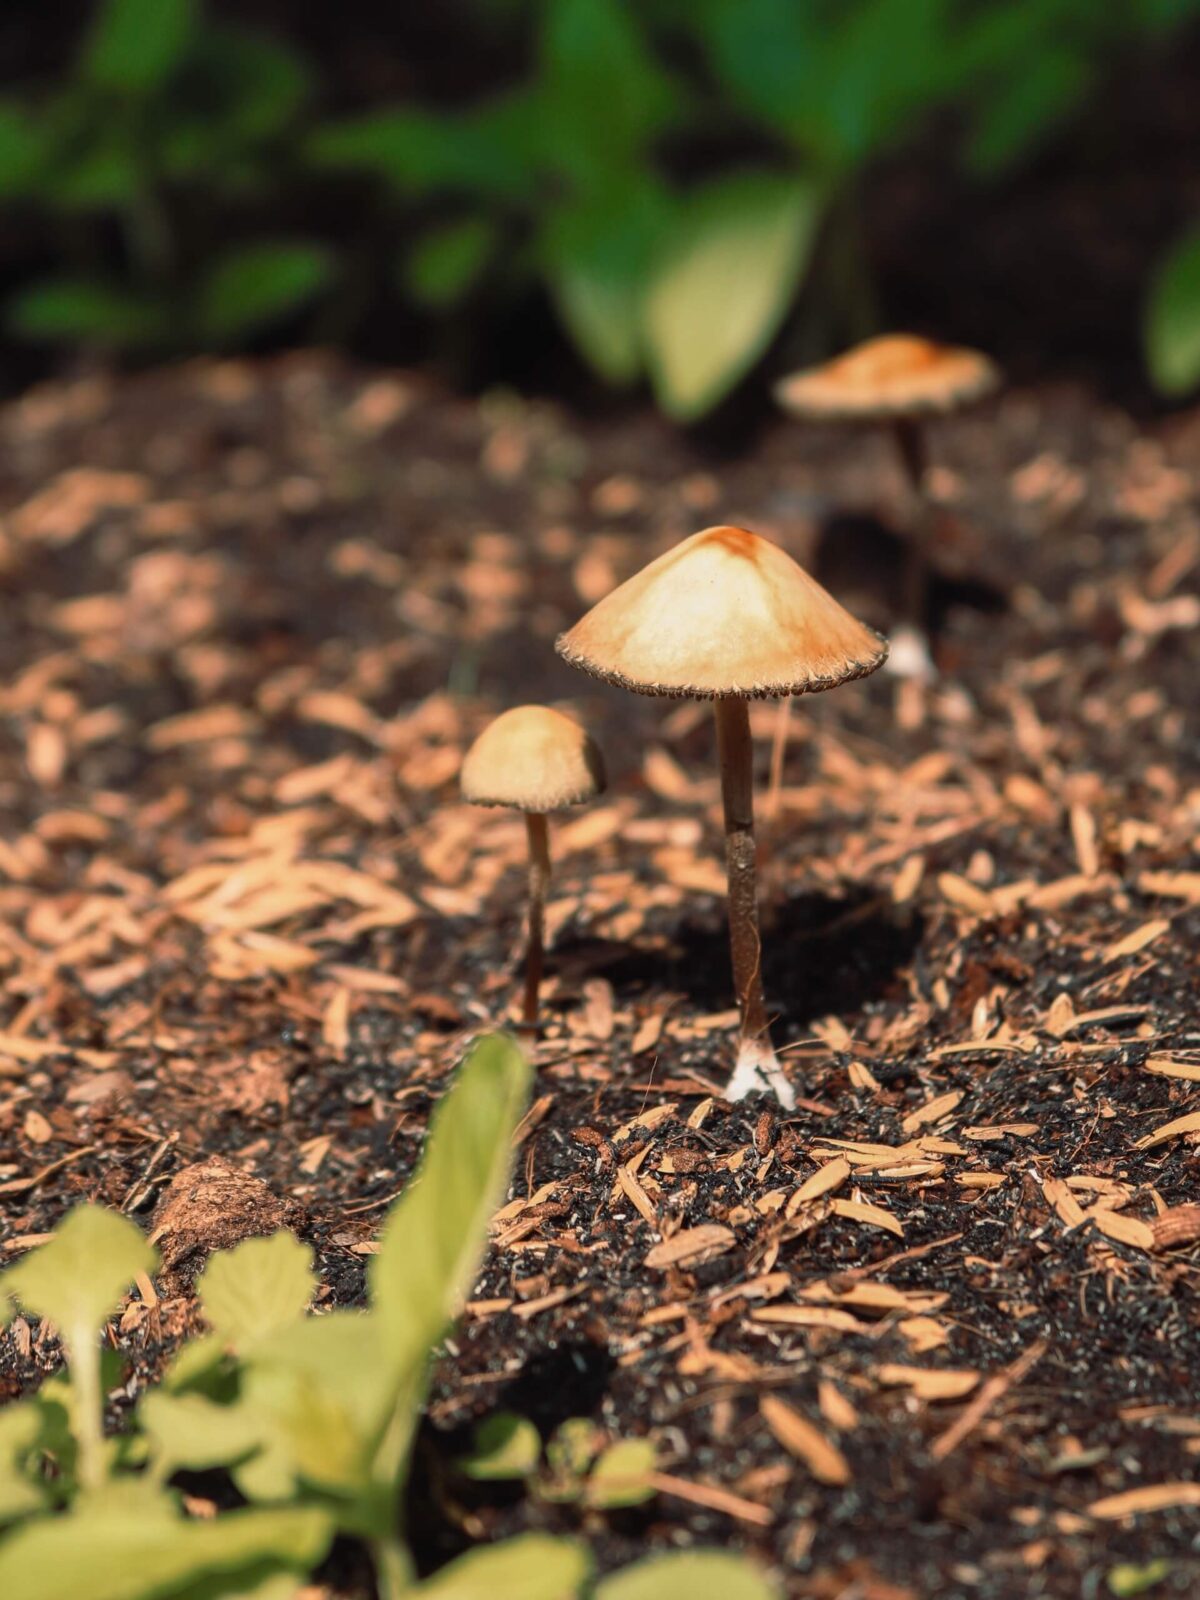 Warning: These 9 Errors Will Destroy Your Buy Psilocybin Spores